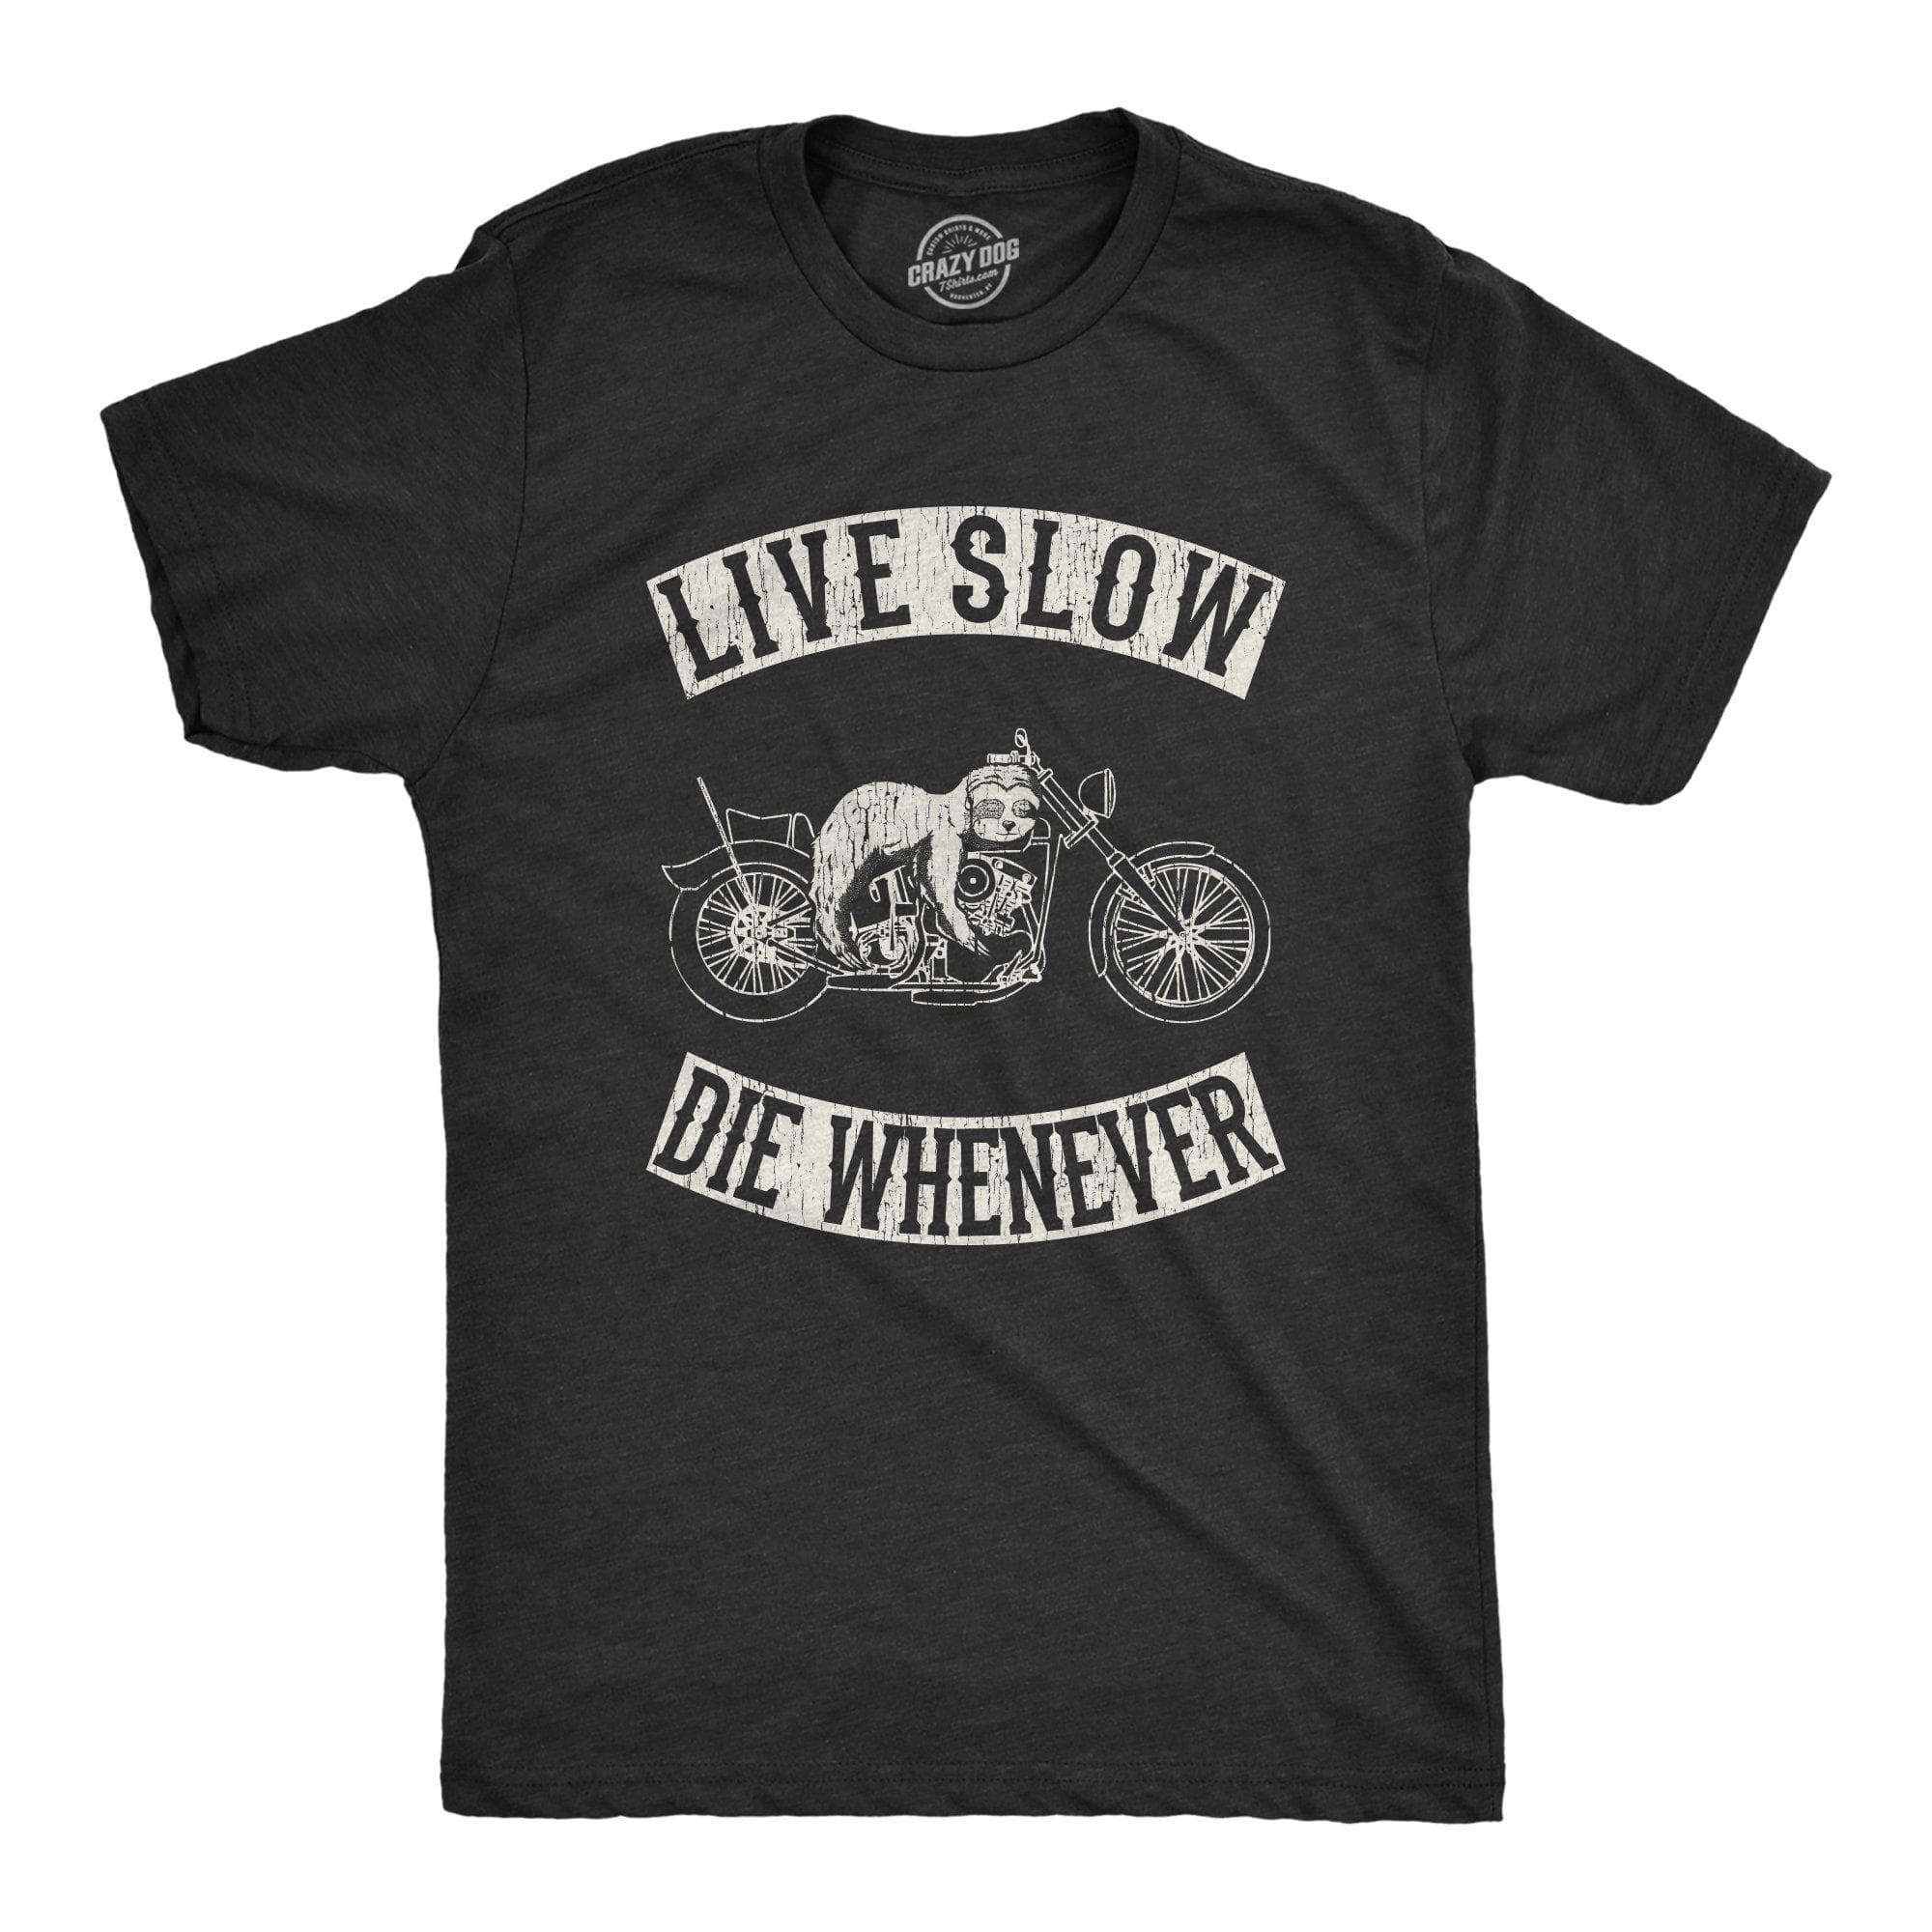 Live Slow Die Whenever Men's Tshirt - Crazy Dog T-Shirts